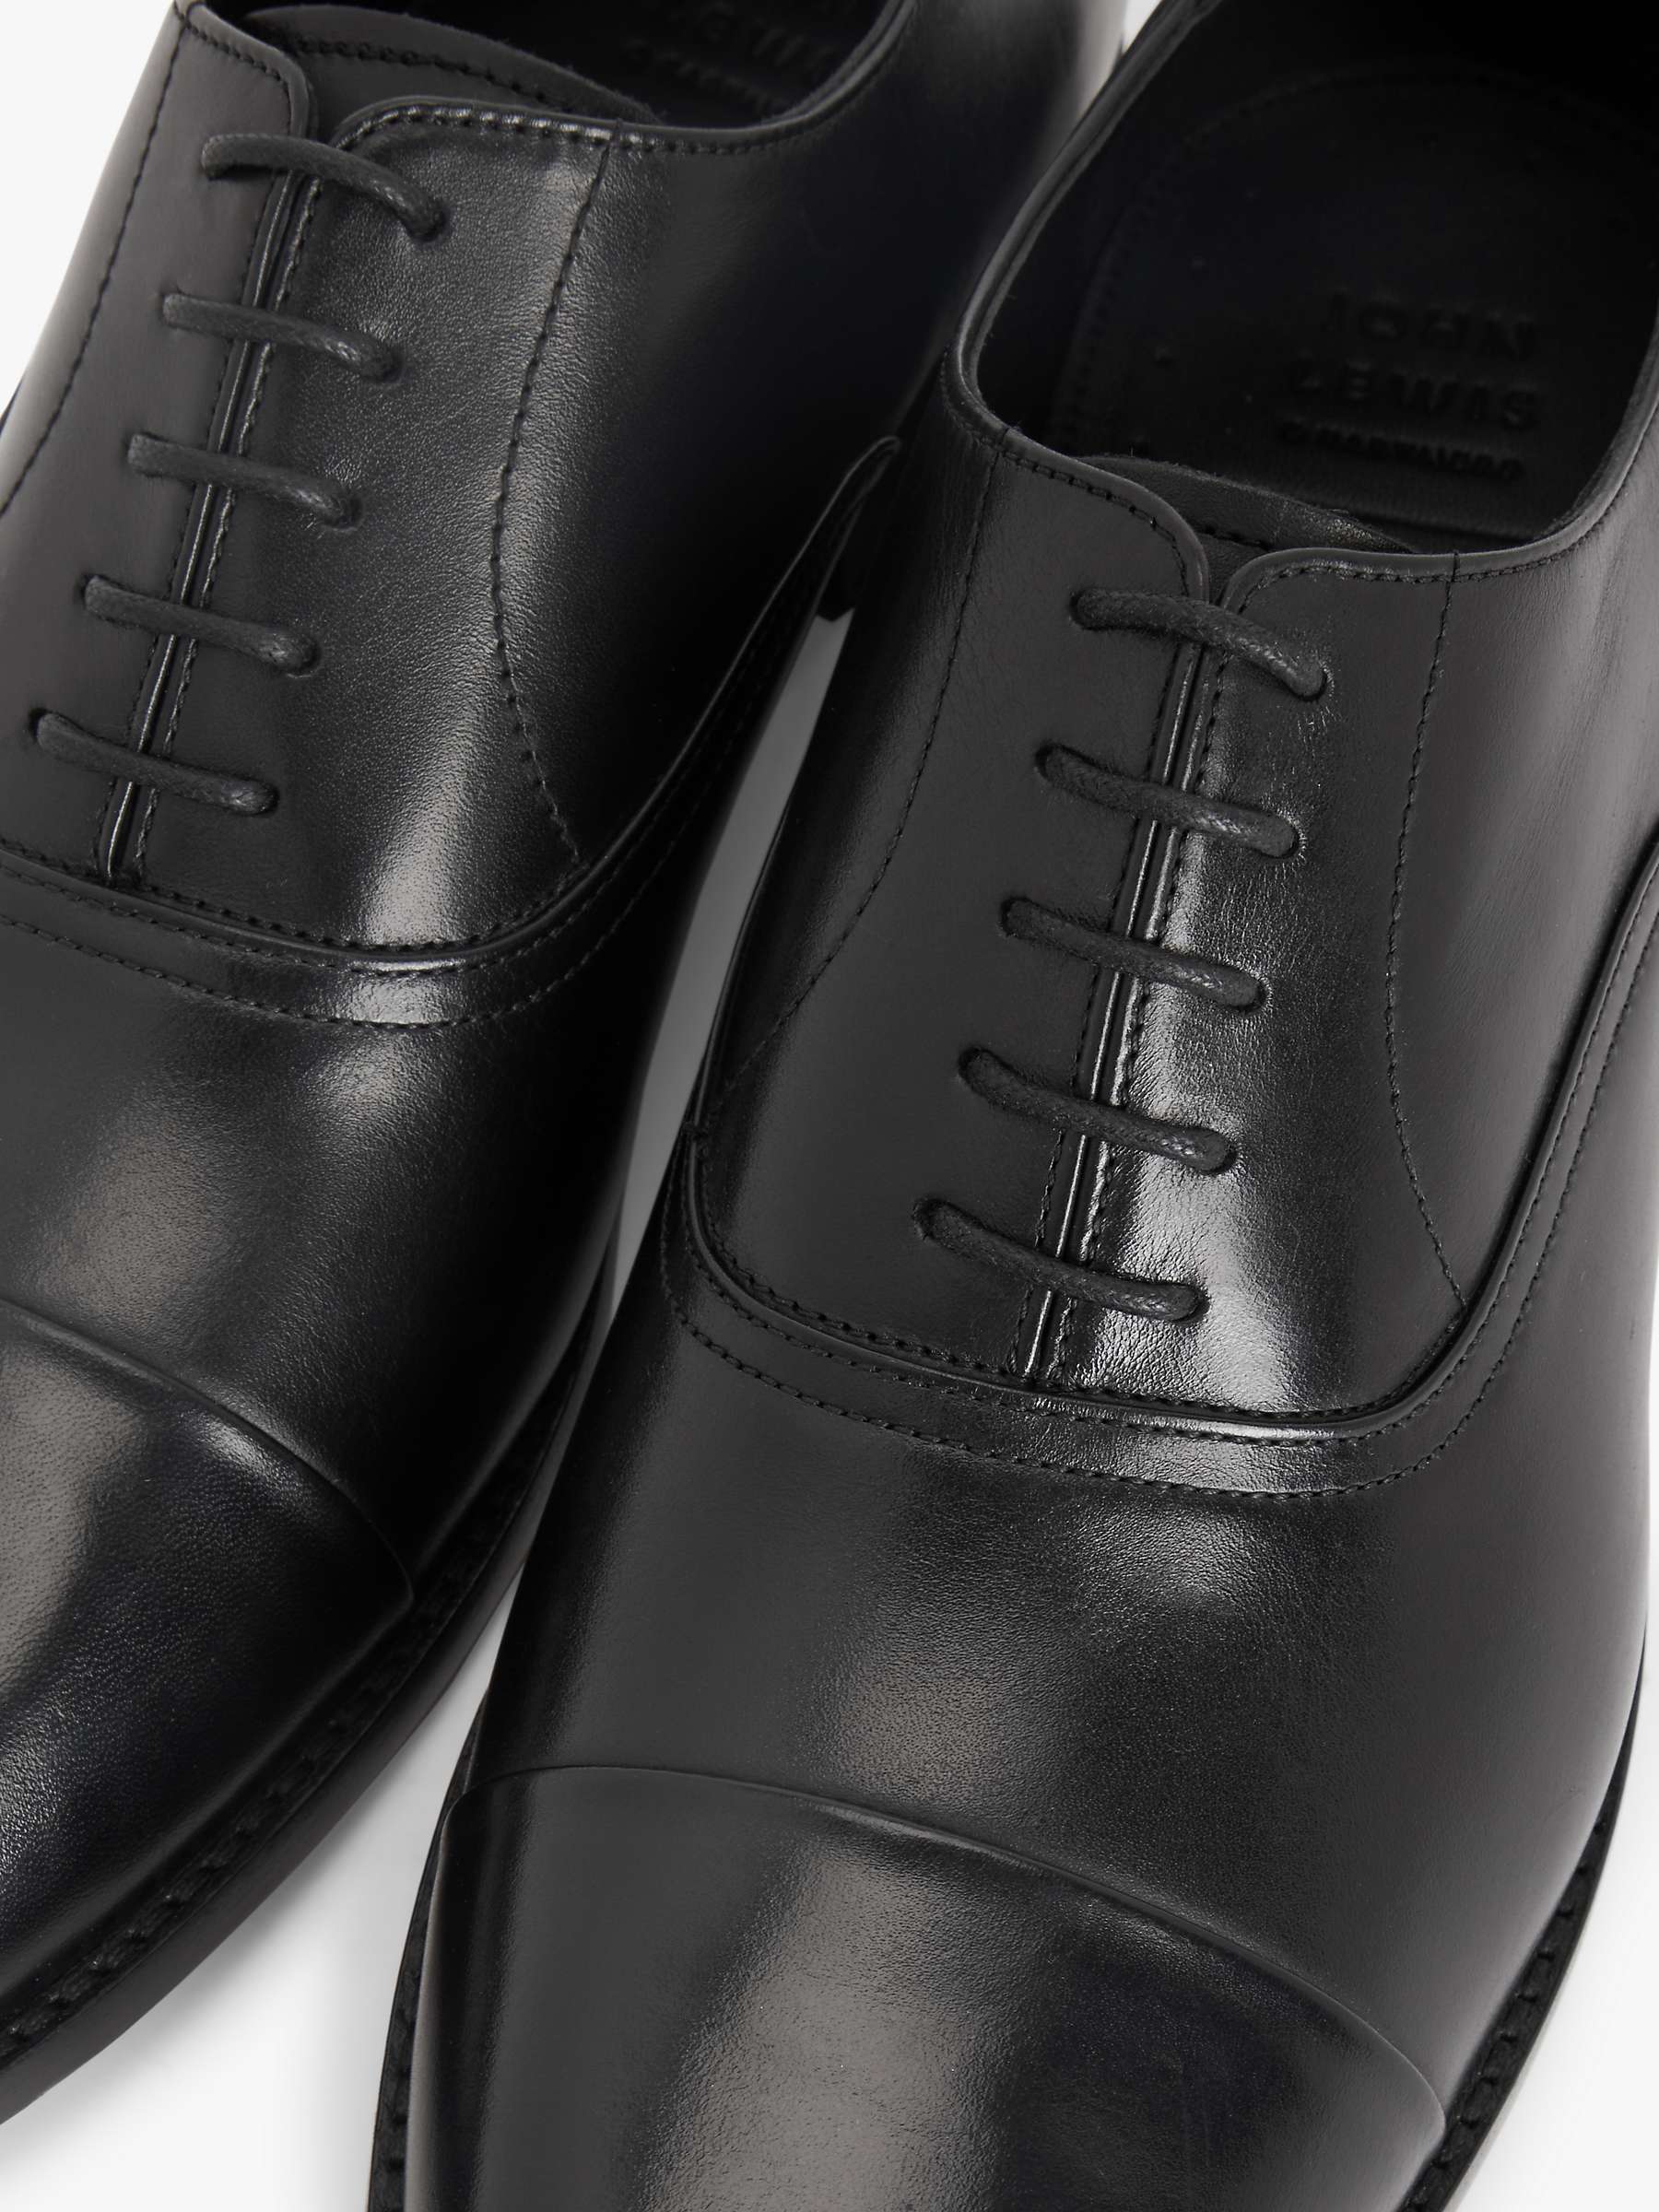 John Lewis Formal Leather Sole Oxford Shoes, Black at John Lewis & Partners